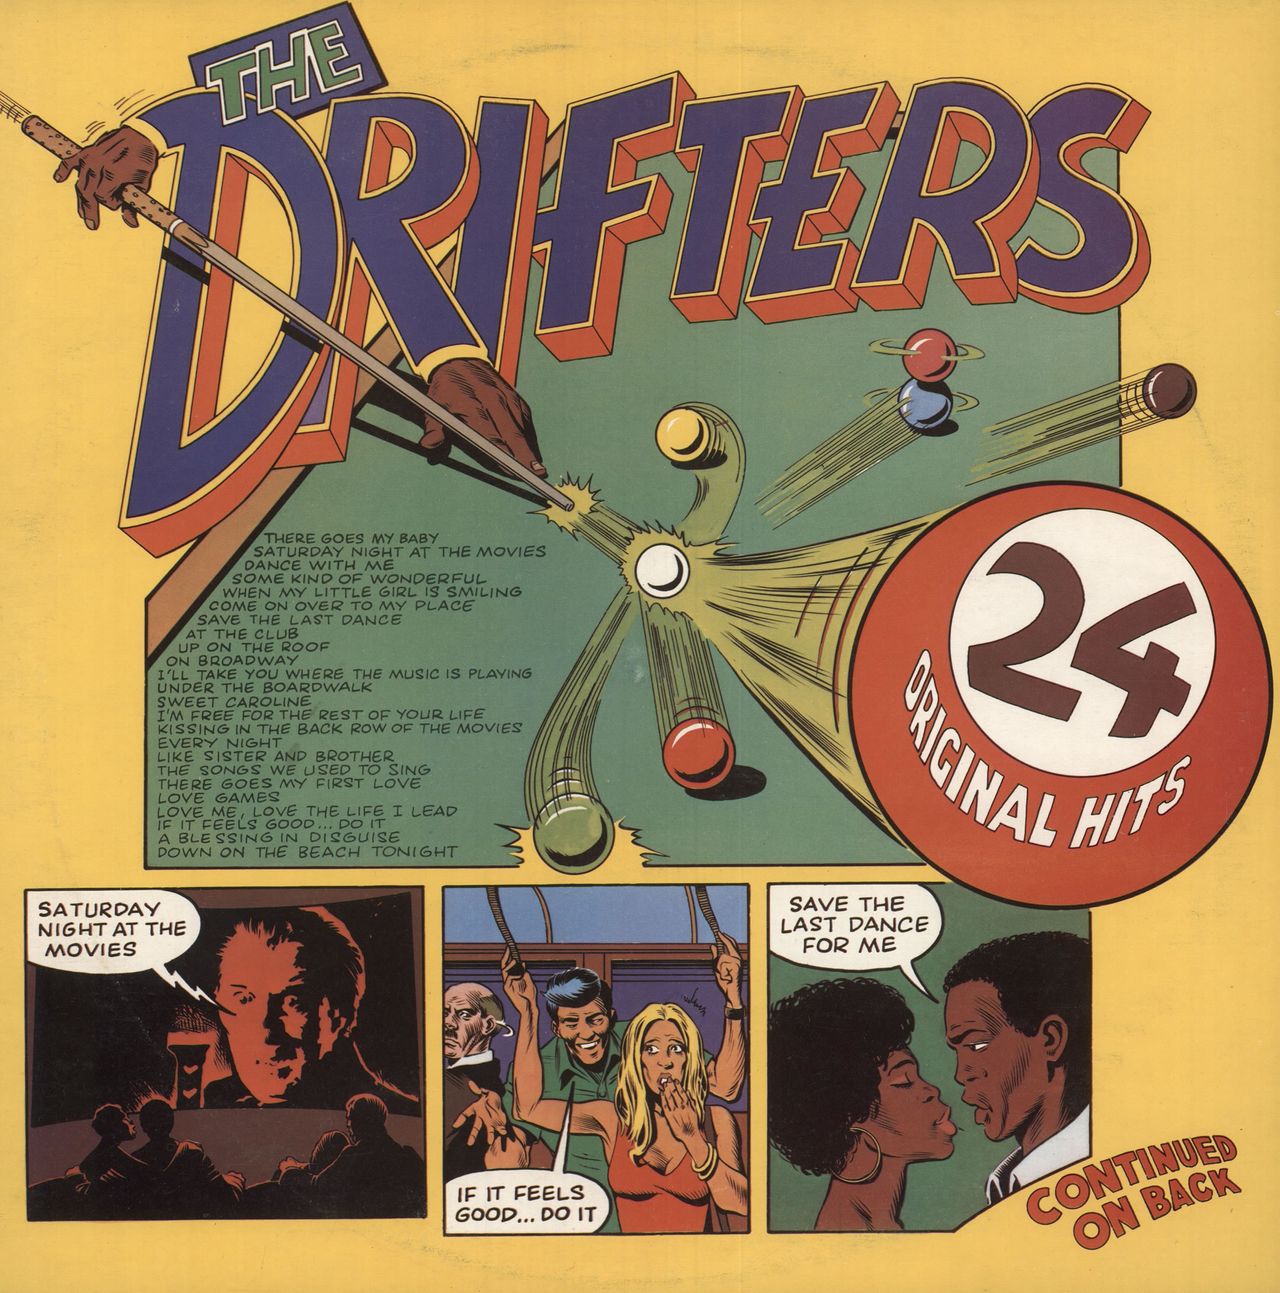 THE DRIFTERS (SOLD OUT) — The Factory Live